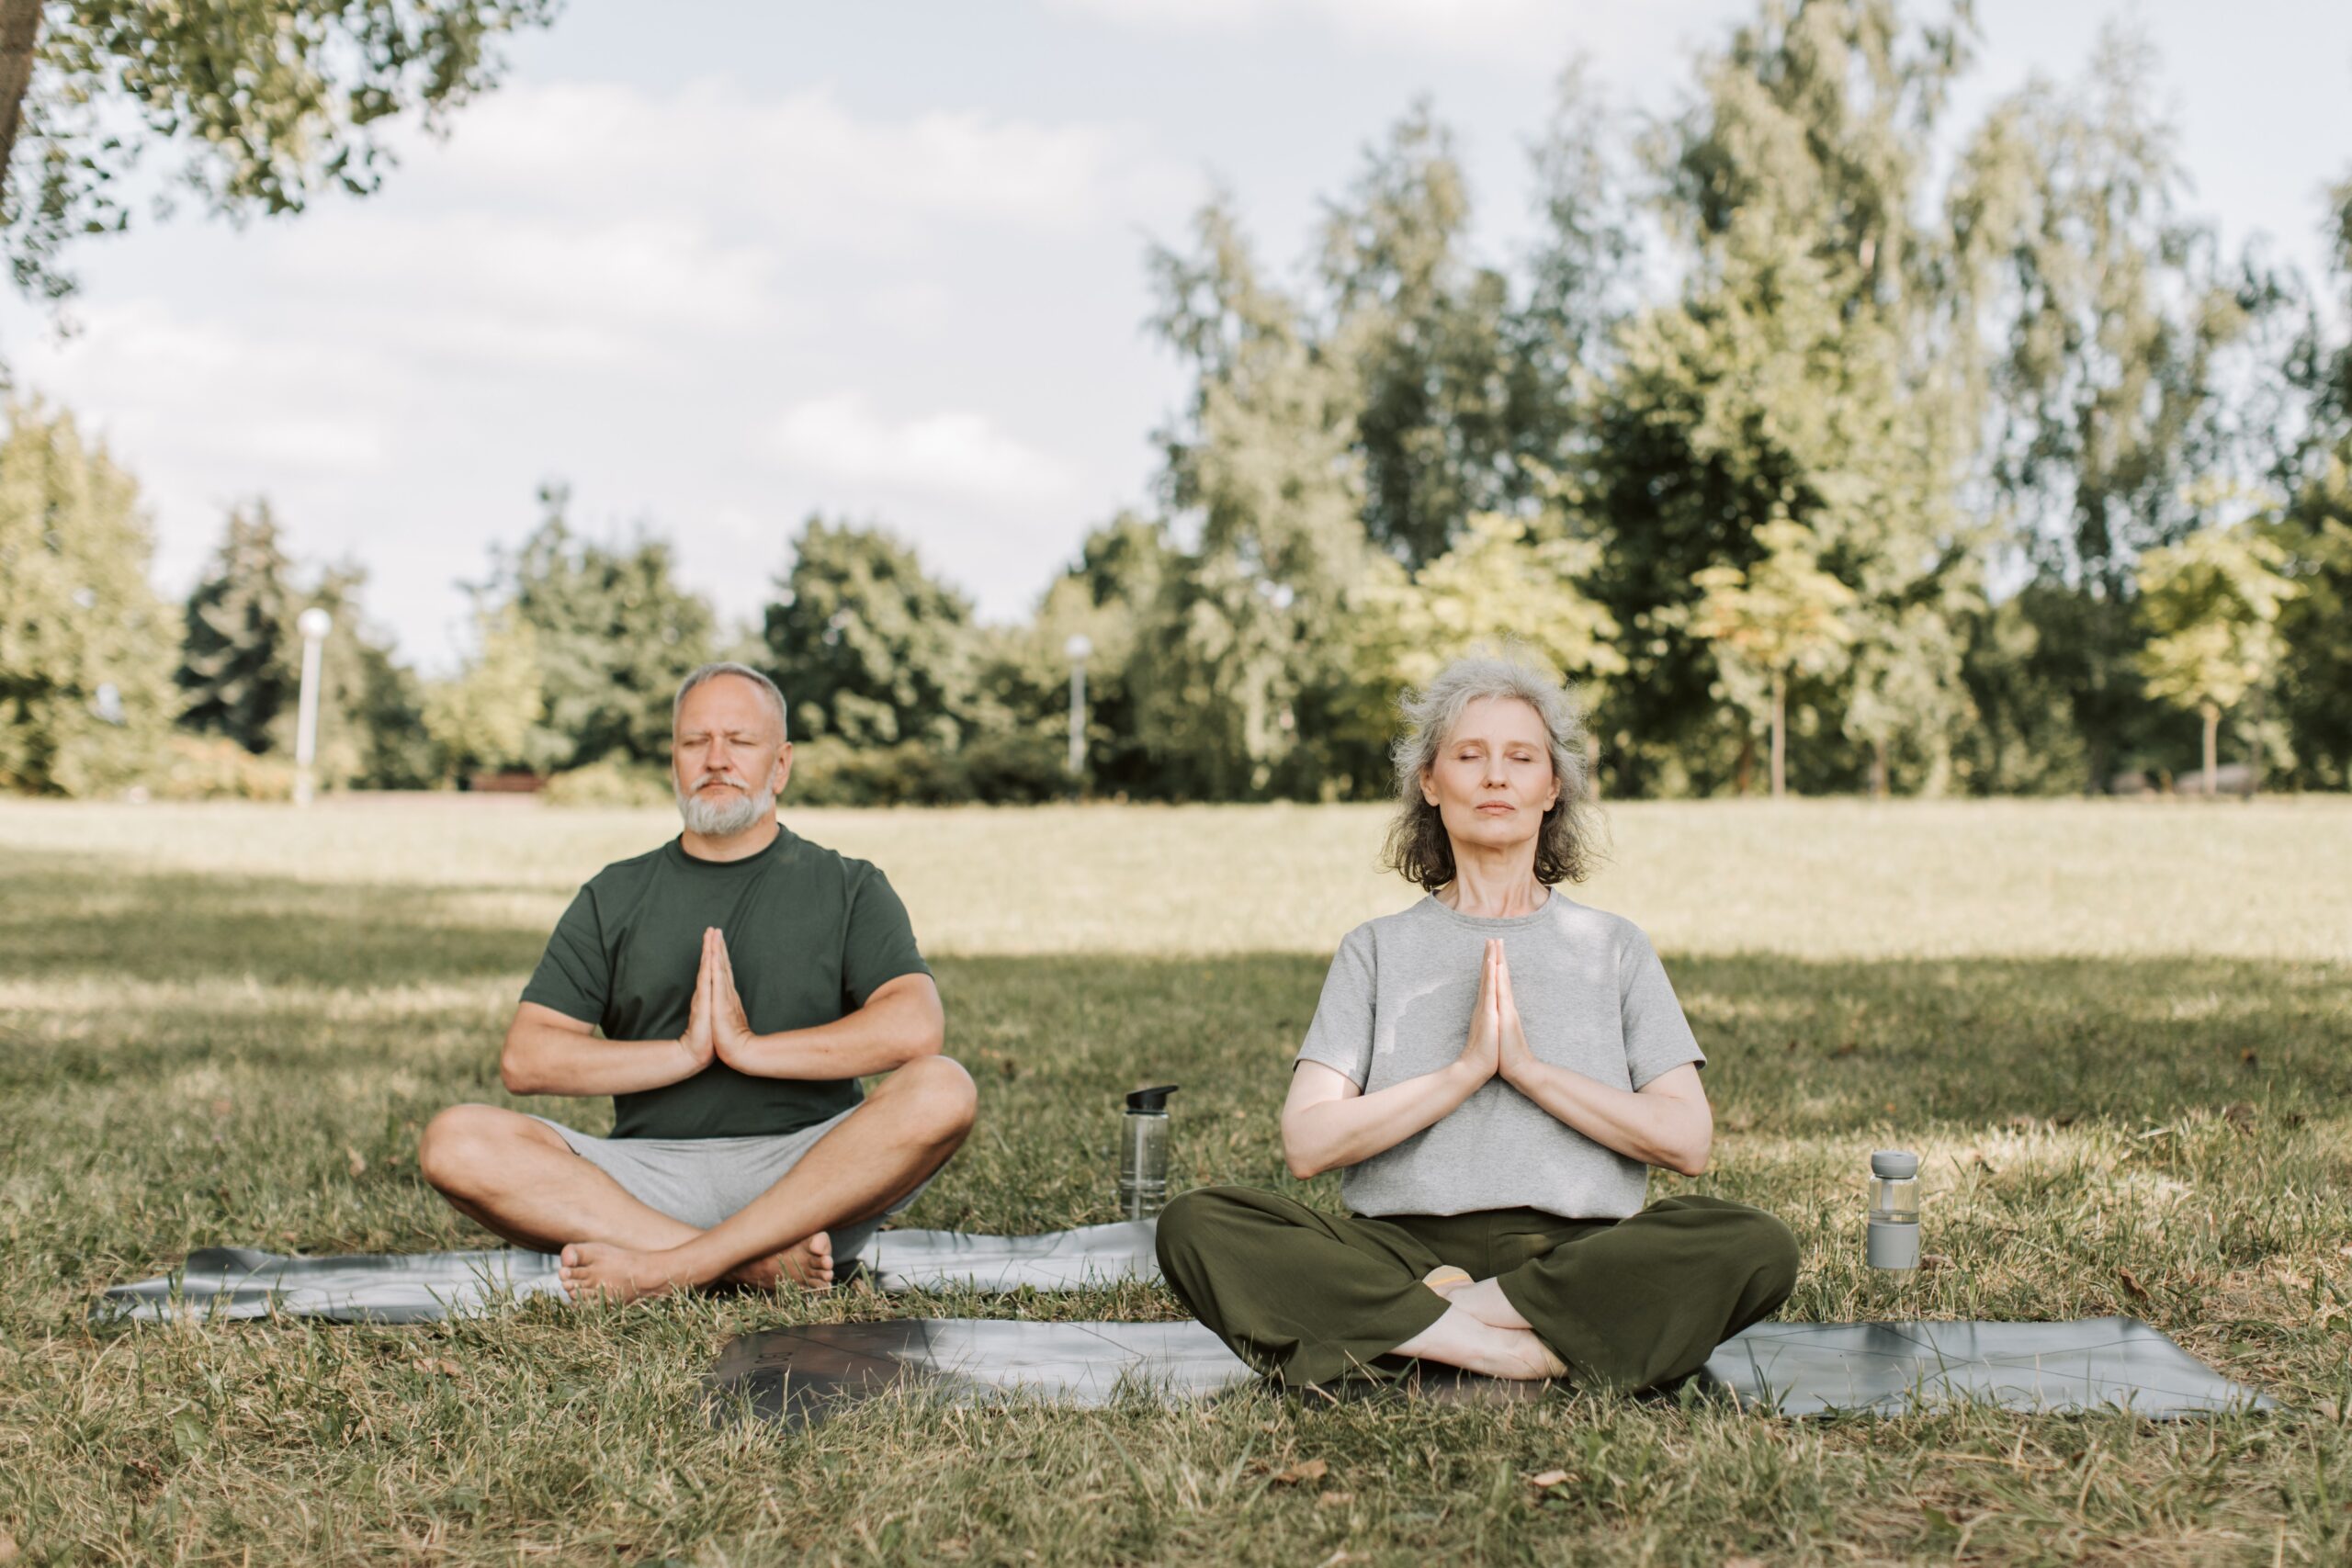 A man and woman meditating in an open field